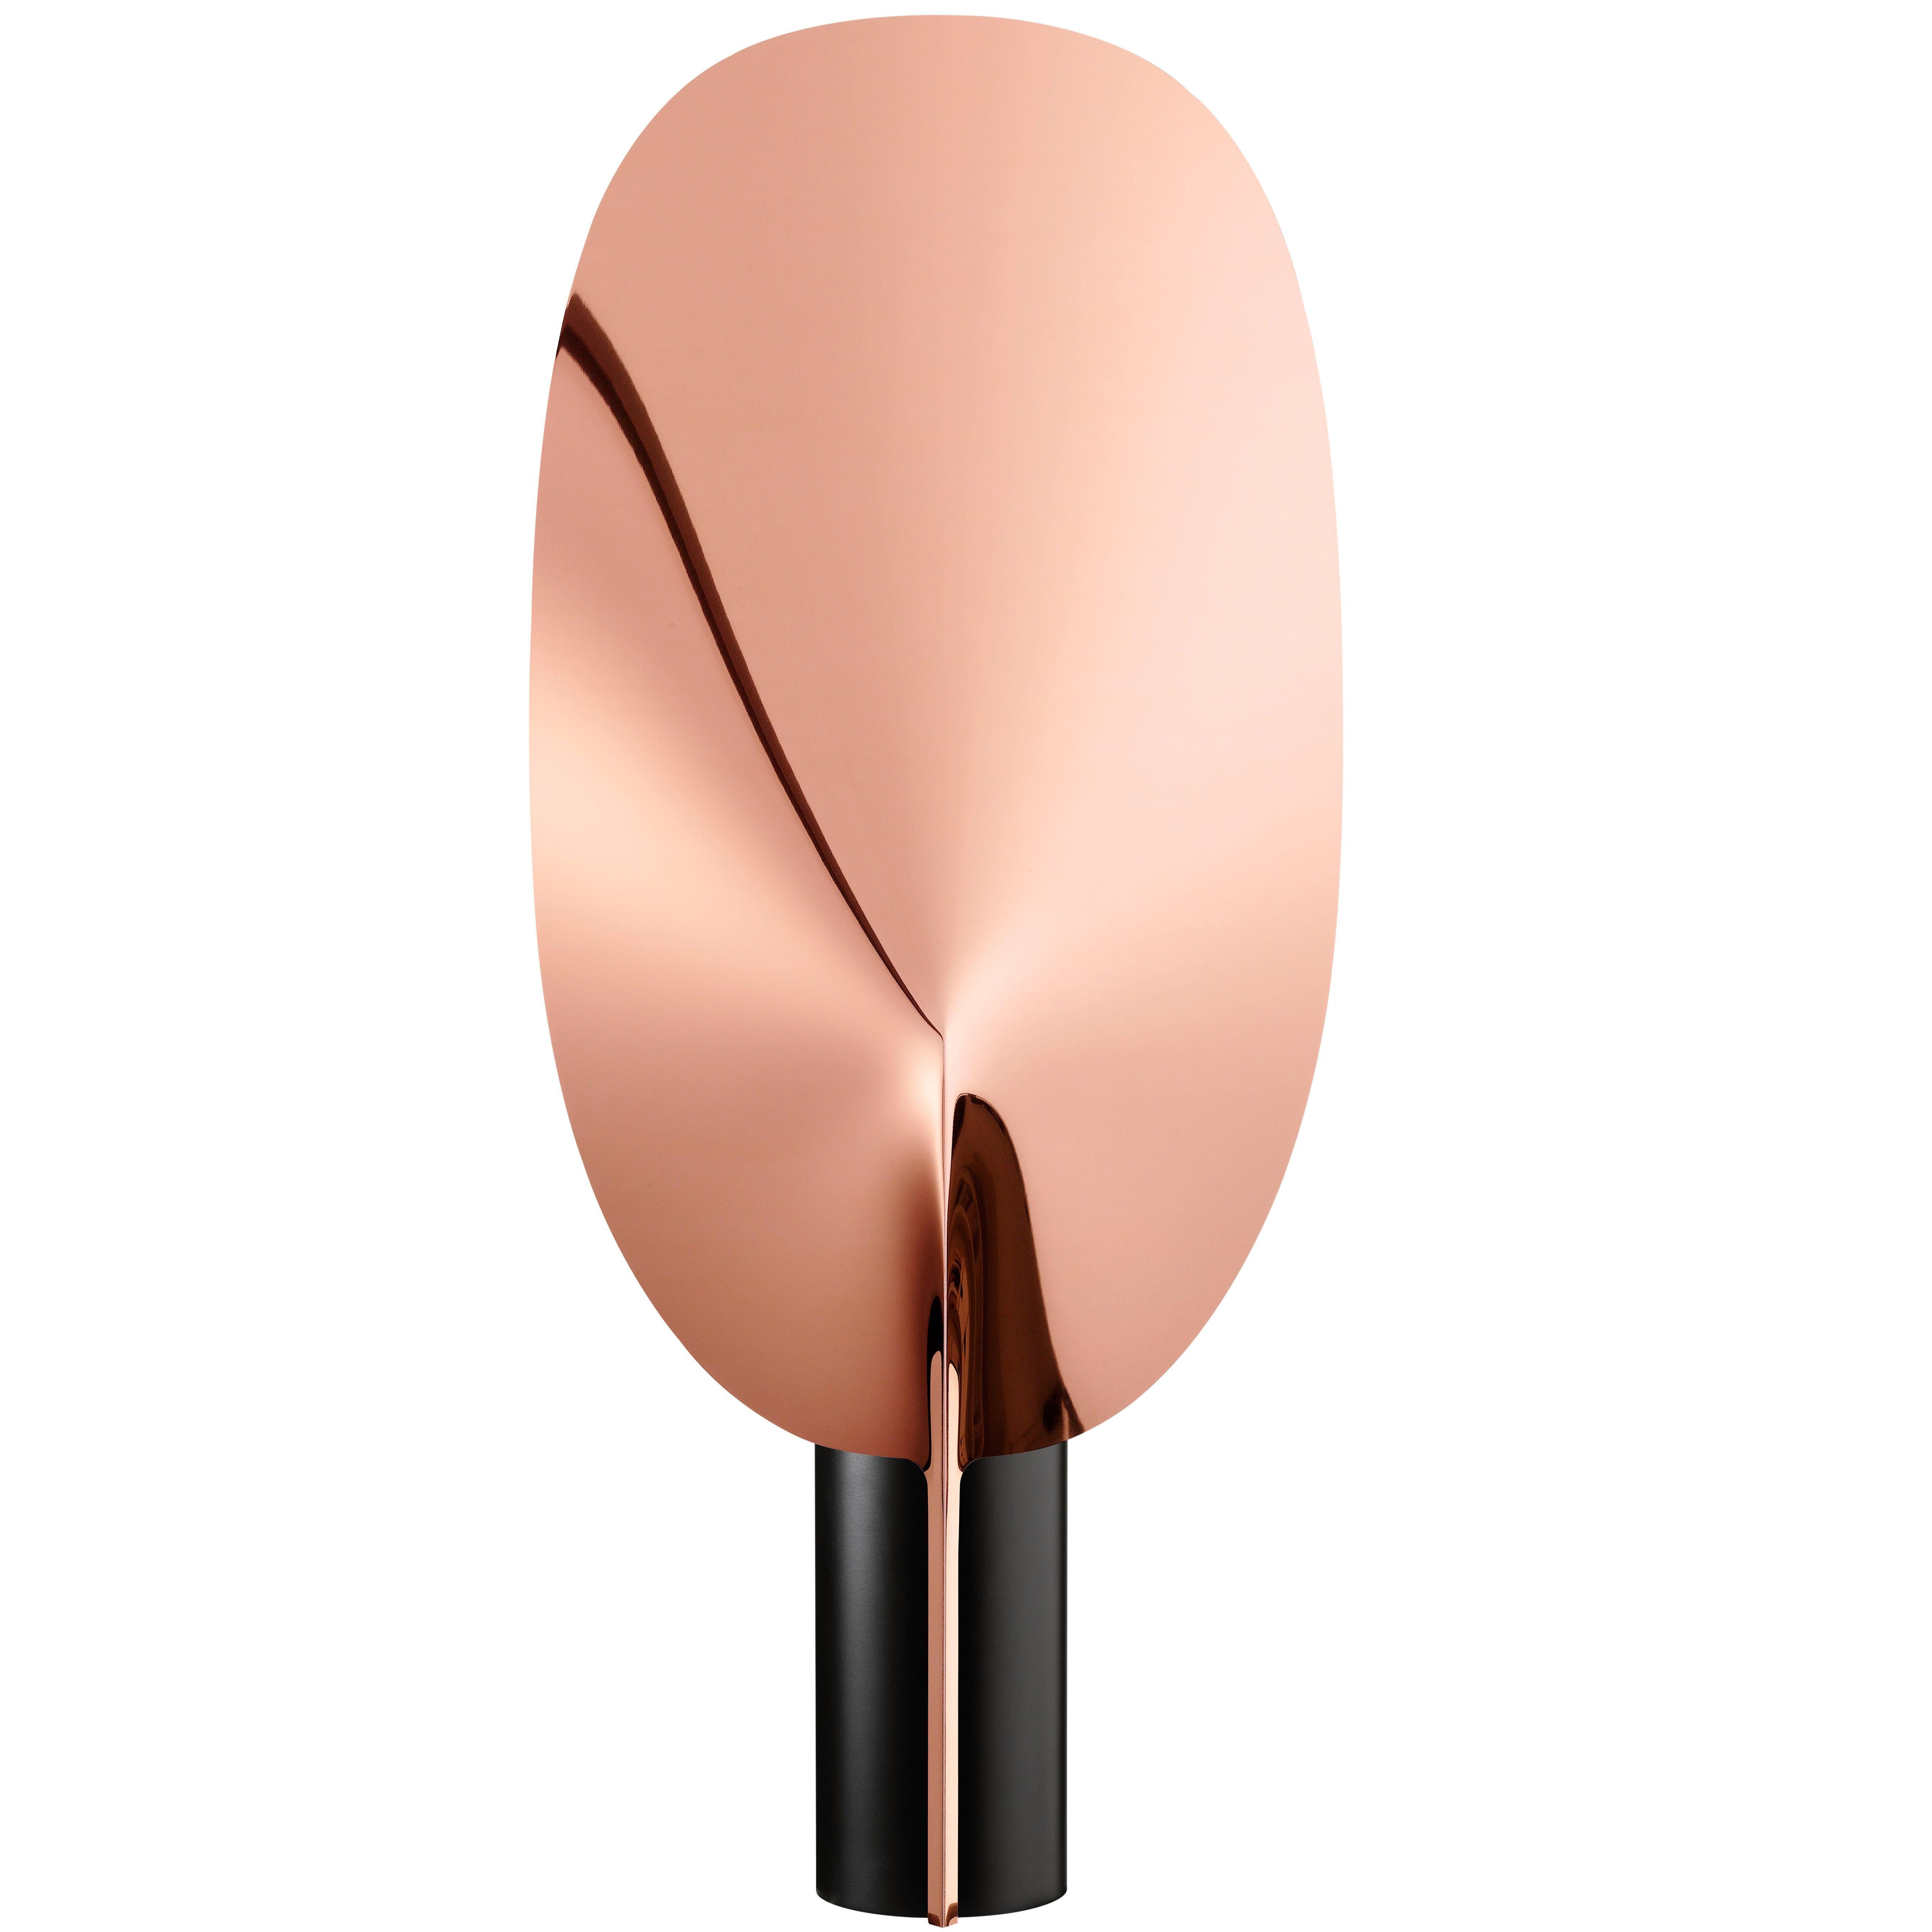 FLOS Serena LED Table Lamp in Copper by Patricia Urquiola